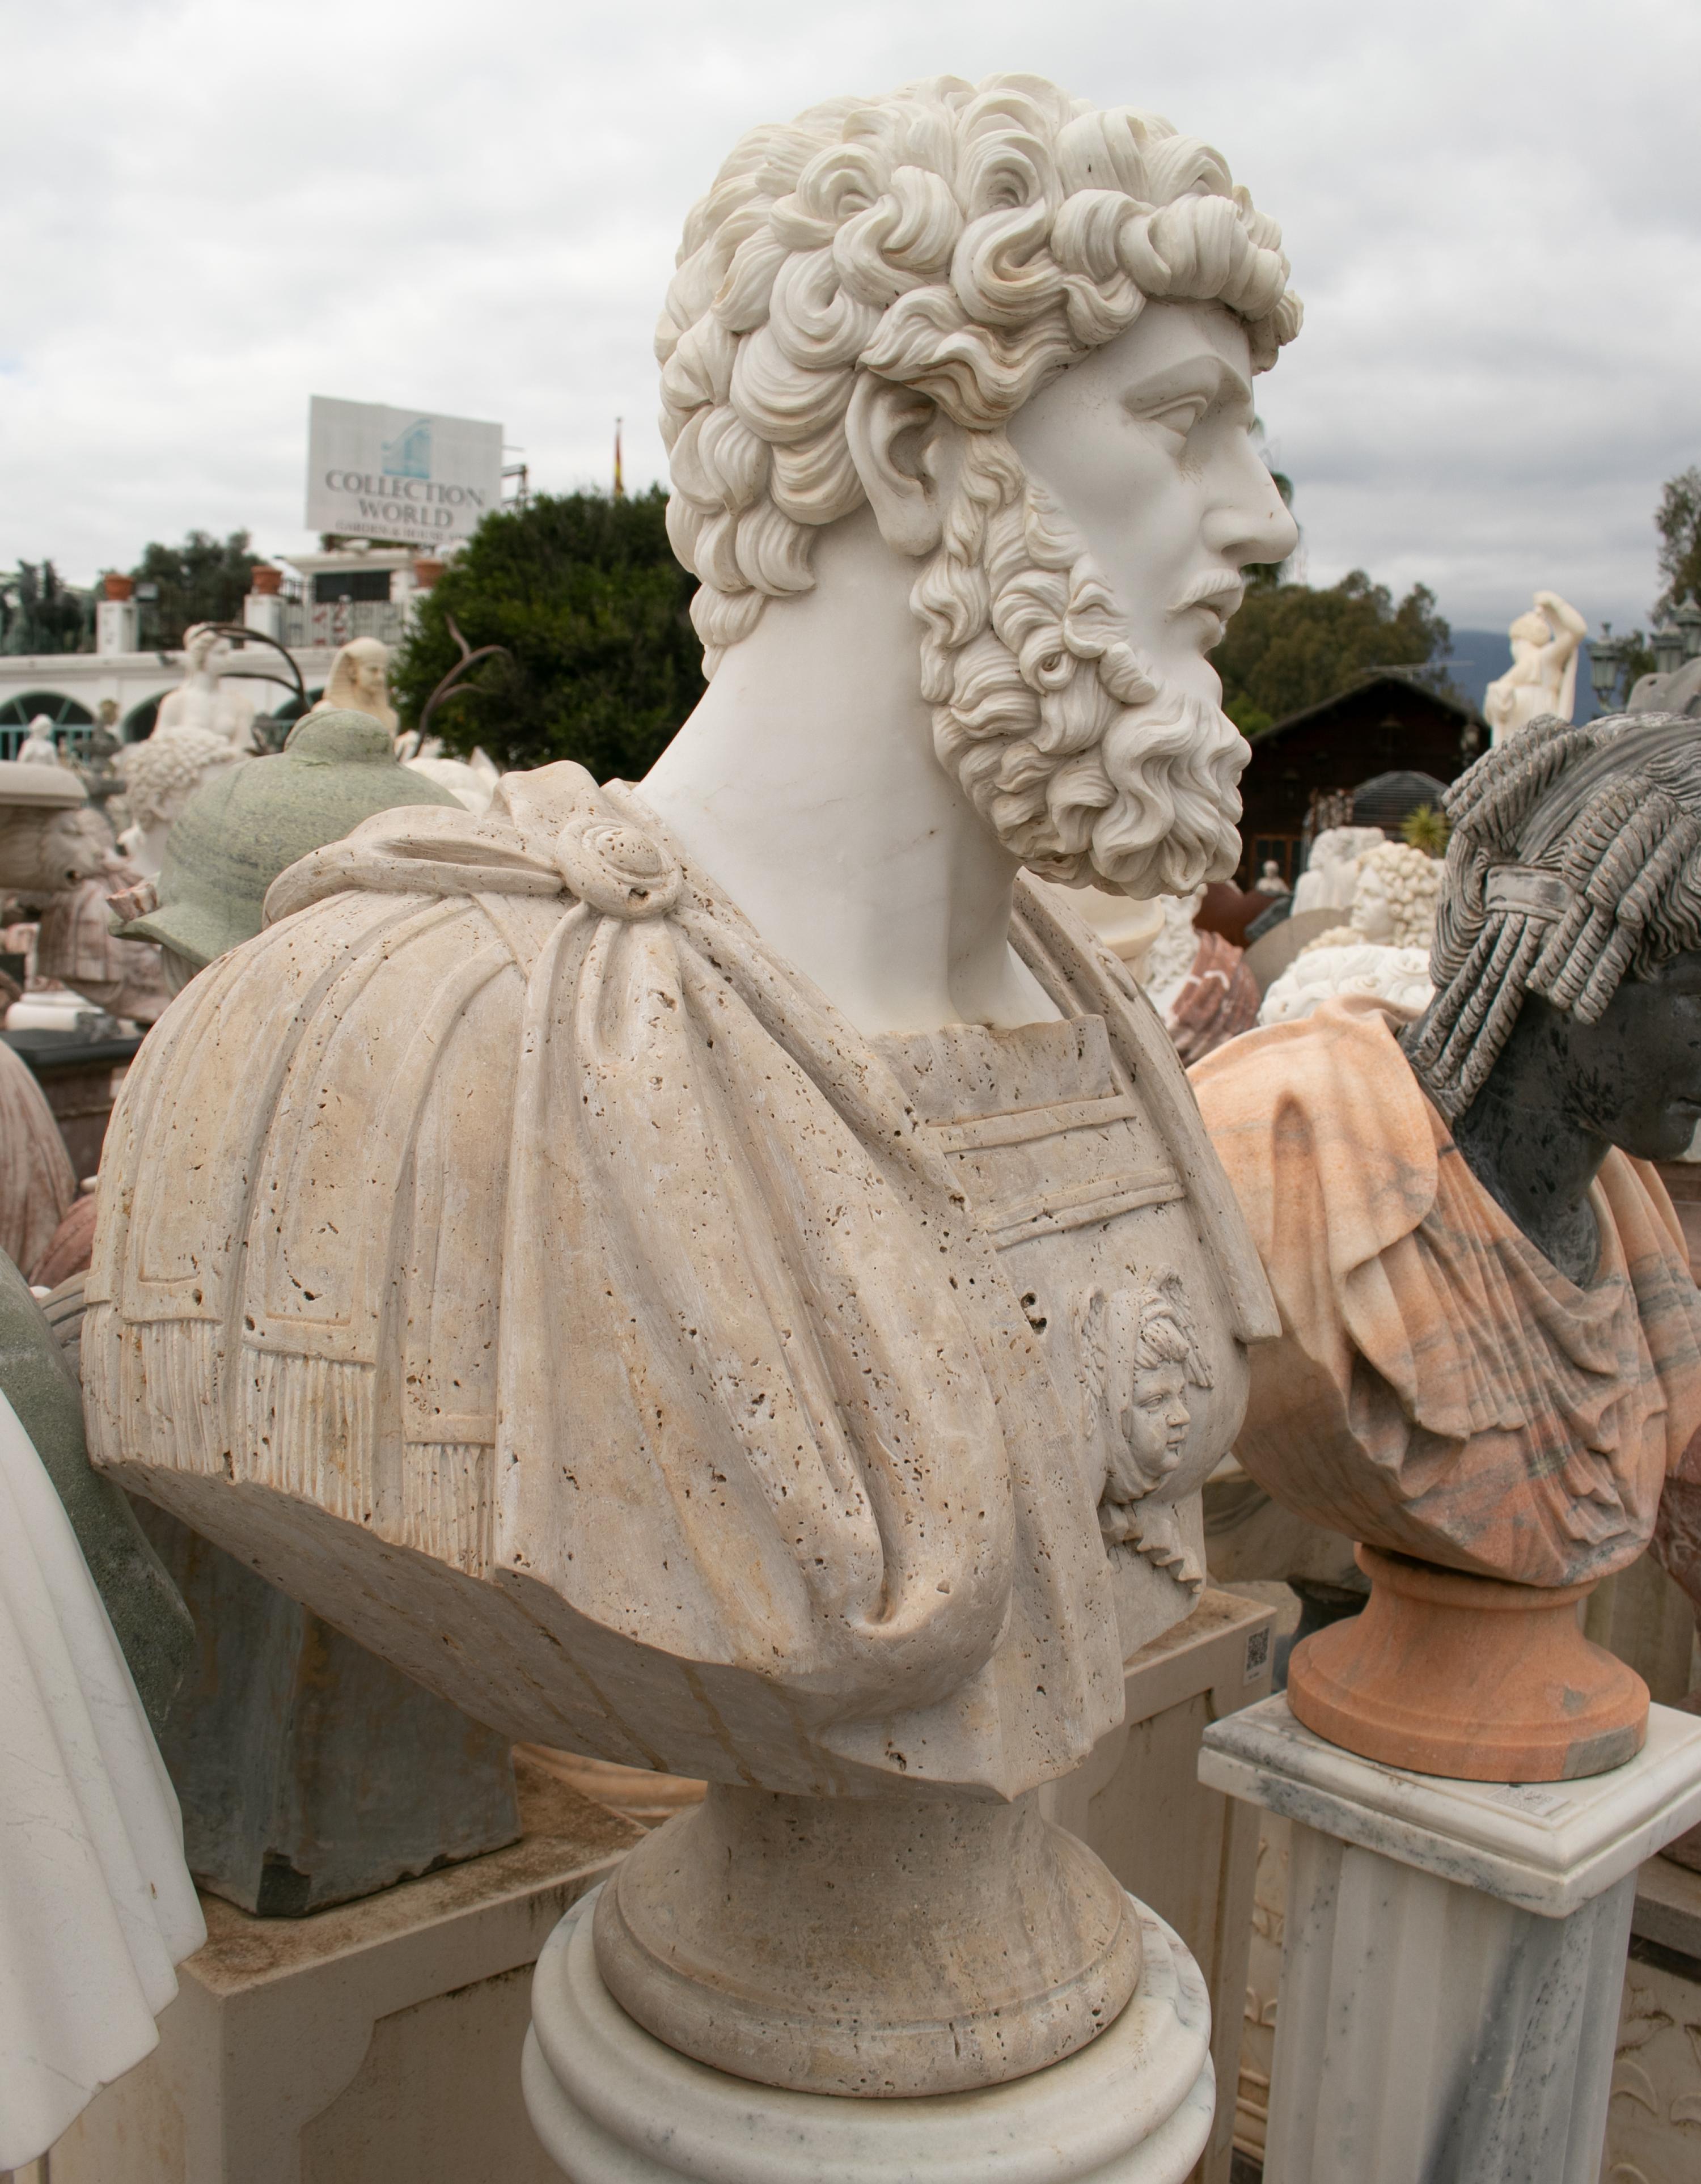 1990s Bust of a Roman, hand carved by craftsmen using Carrara white marble for the head and travertine marble on the toga, where the white veins give movement and realism to the cloth.